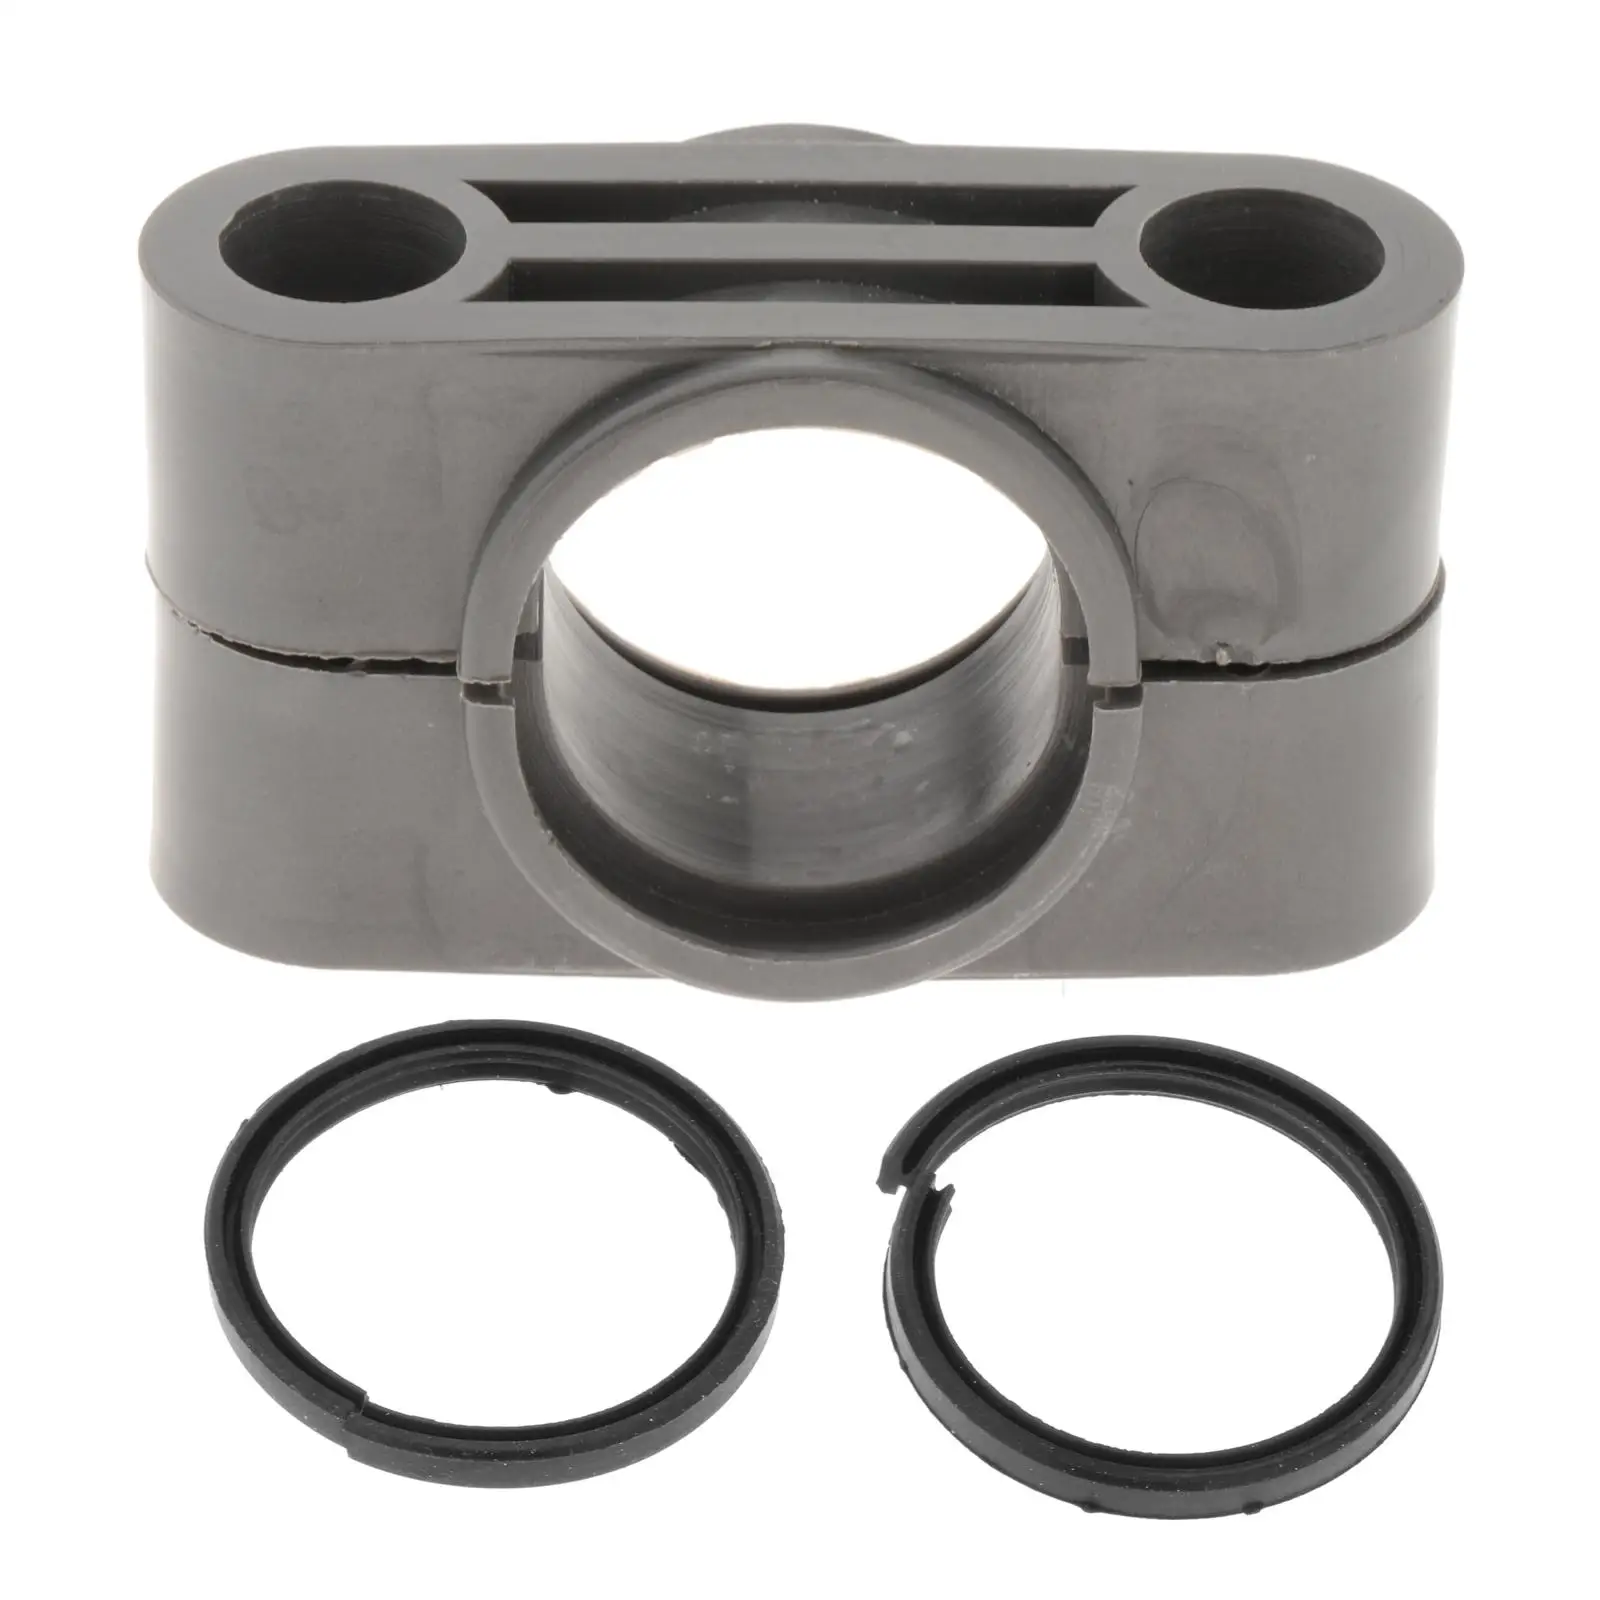 Steering Stem Bushing Seal Fits for Yamaha YFZ450 450 Banshee Accessories Parts Durable Premium Easy Install